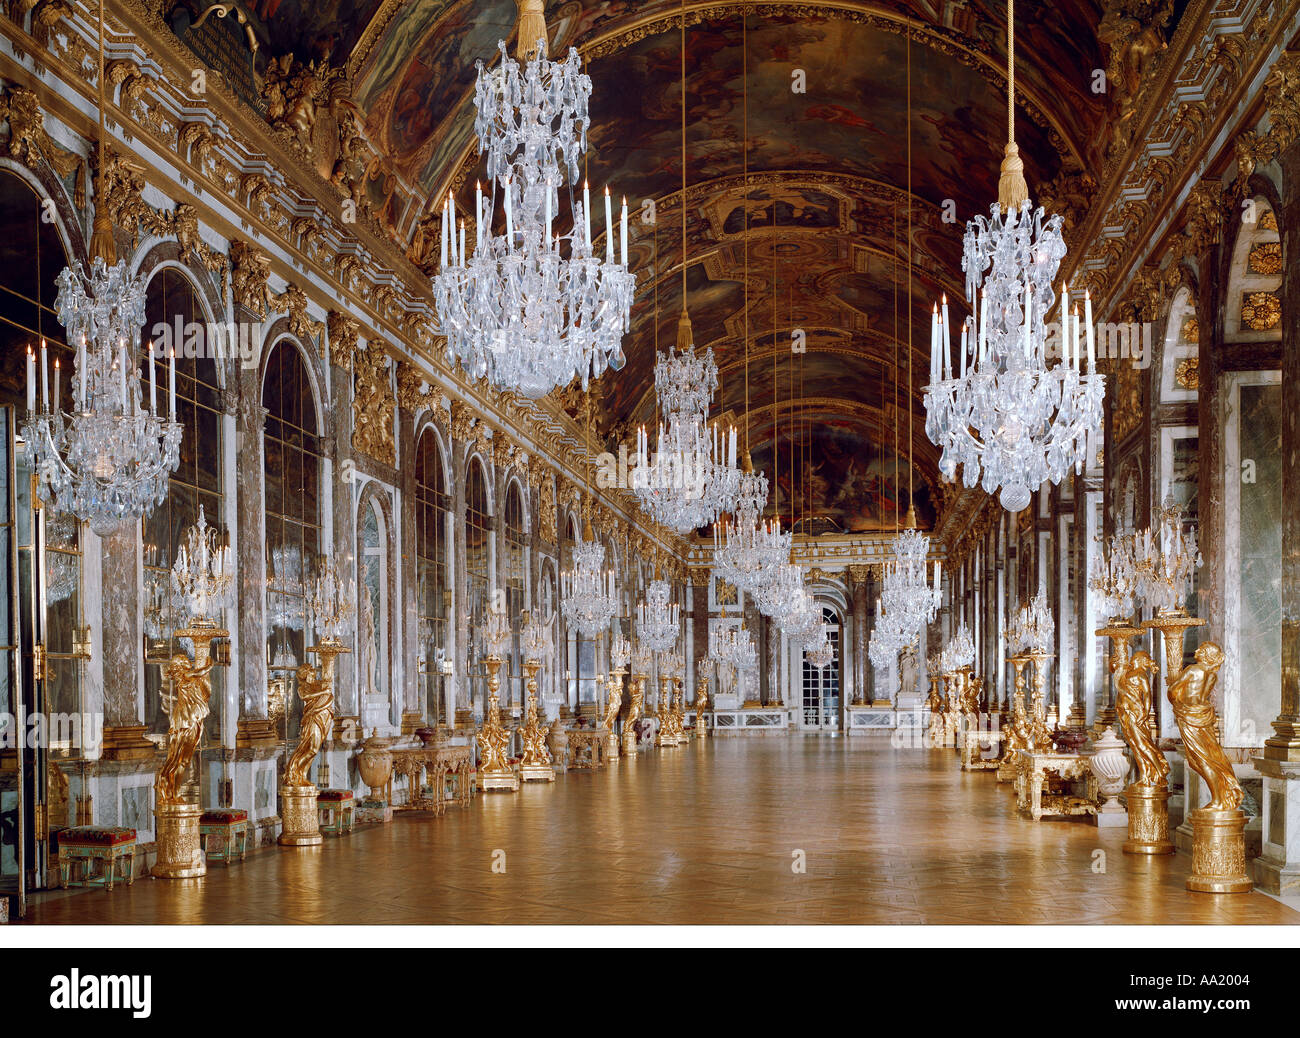 Palace of Versailles Galerie des Glaces Stock Photo